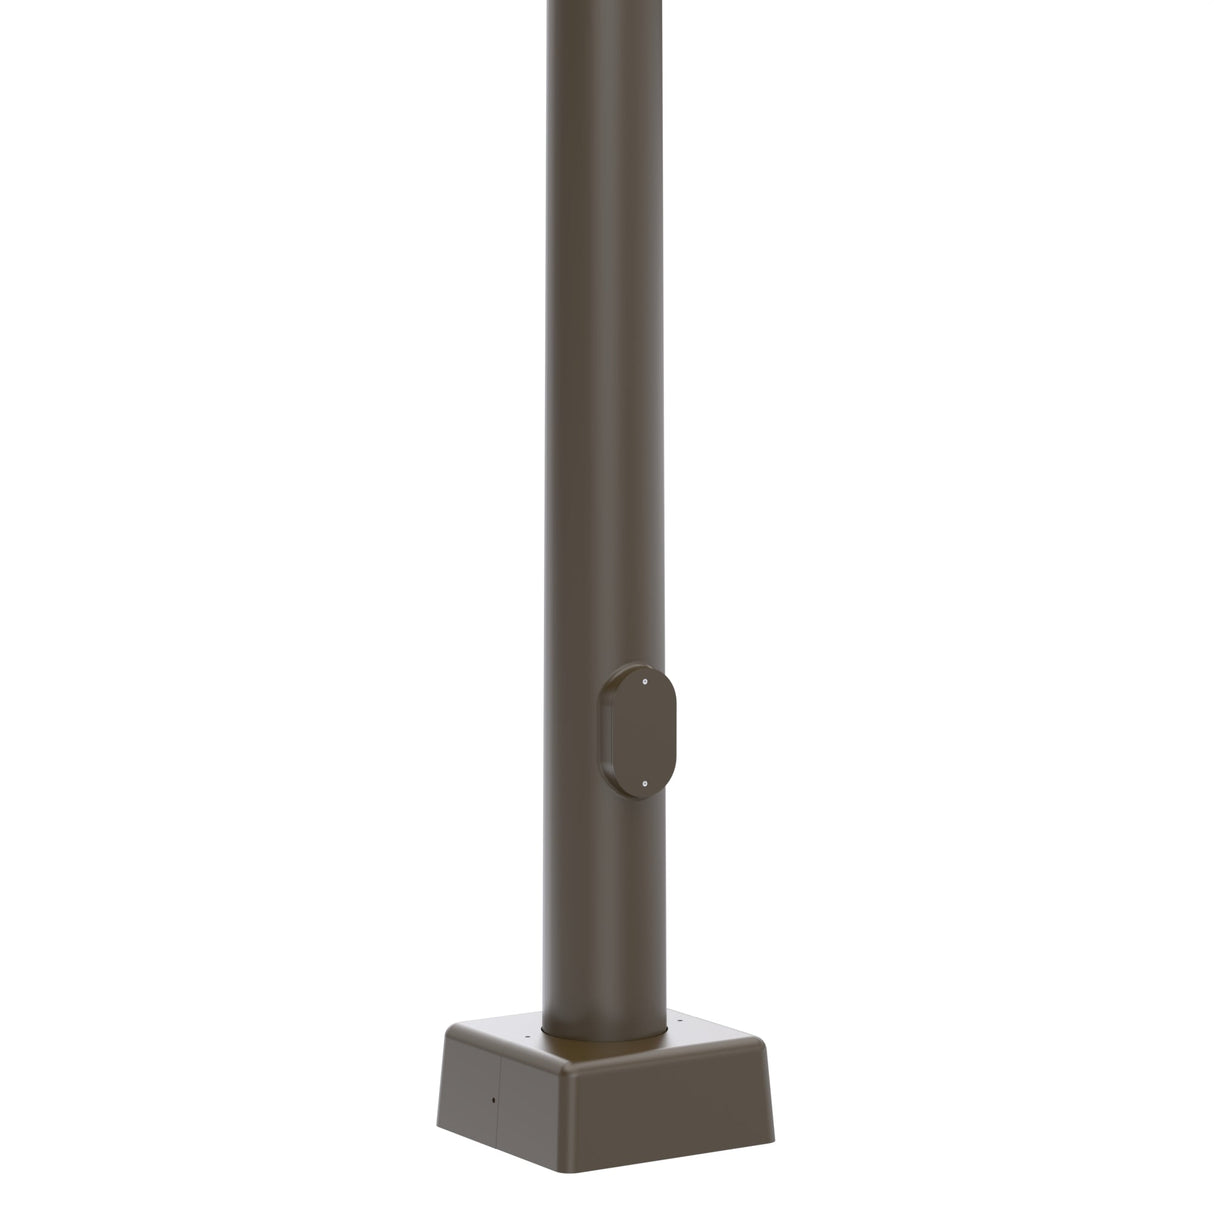 45' Tall x 11" Base OD x 4.7" Top OD x 7ga Thick, Round Tapered Steel, Anchor Base Light Pole